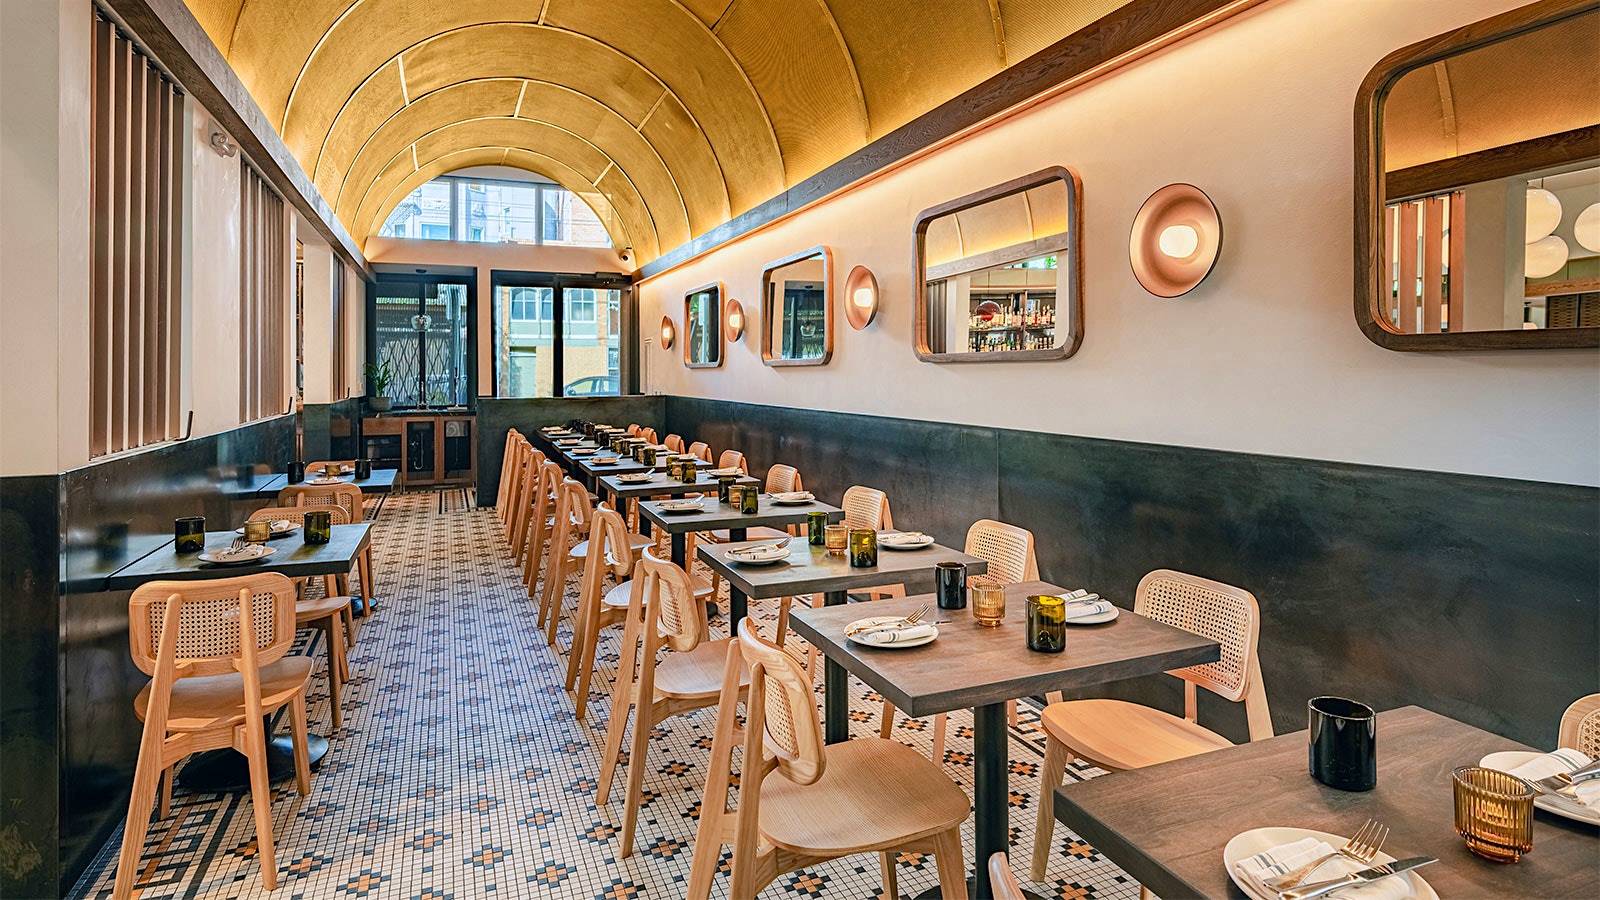  One of Delfina's revamped dining rooms, with a gold arched roof